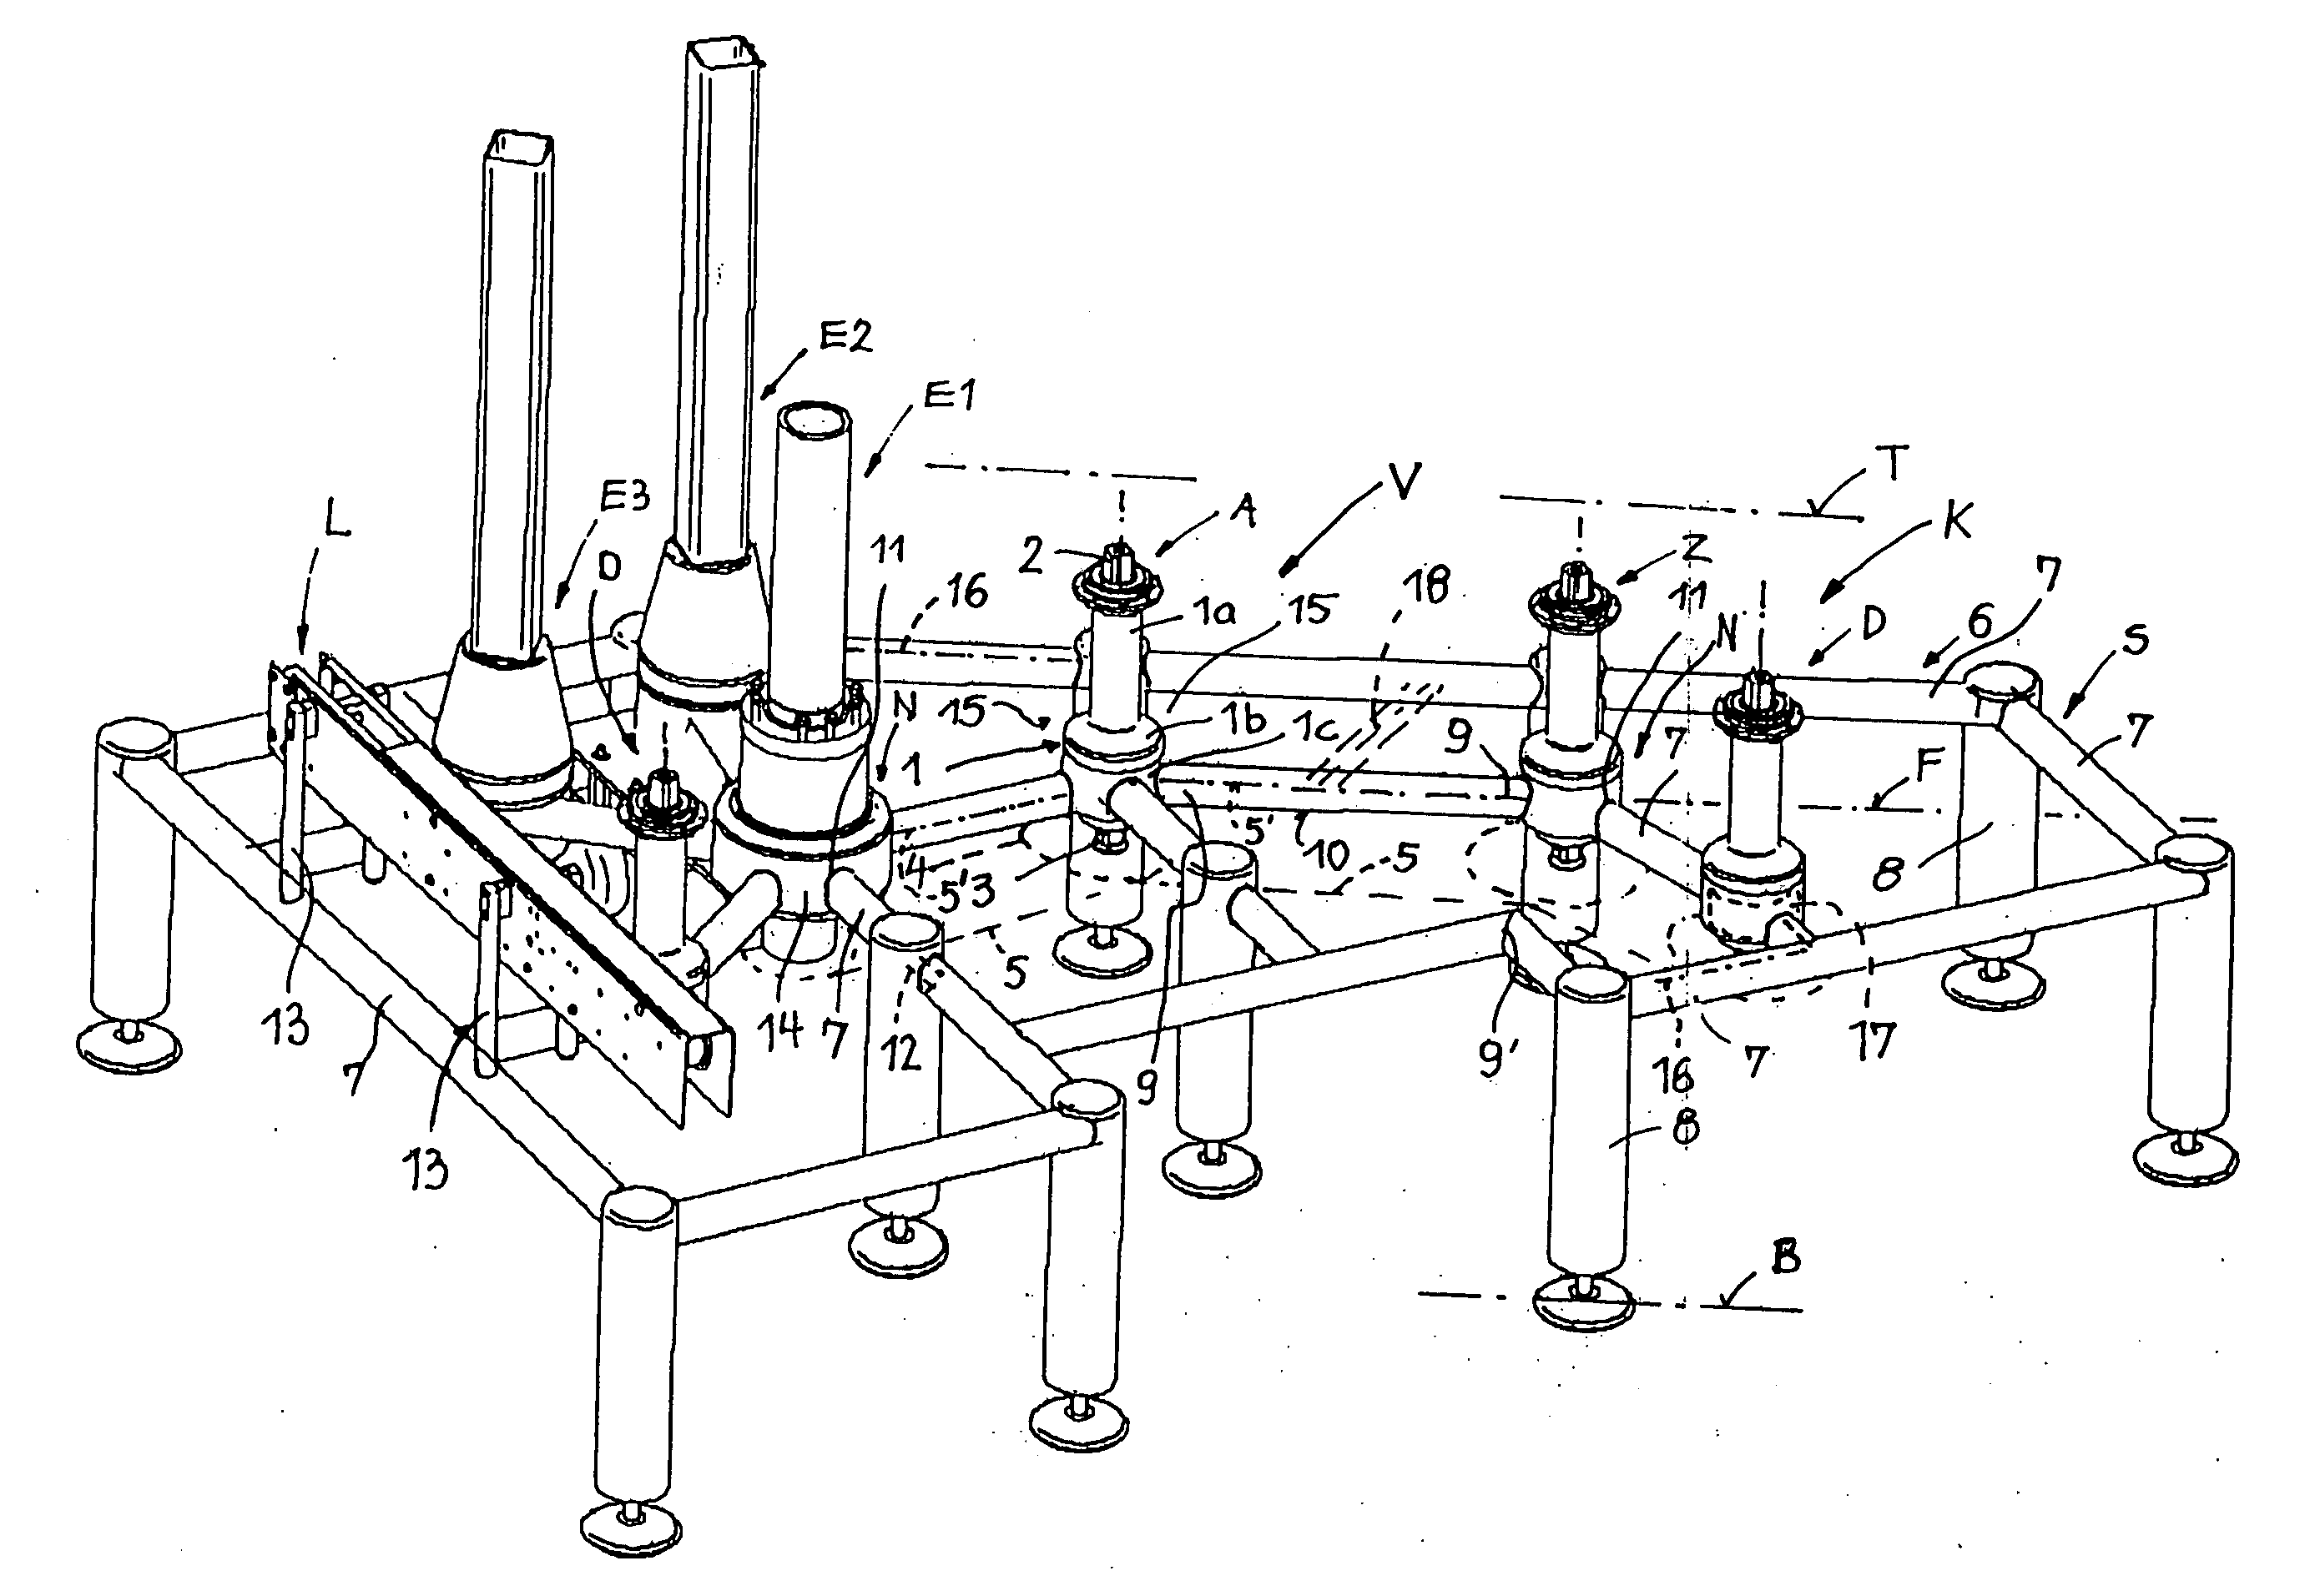 Apparatus Support Structure